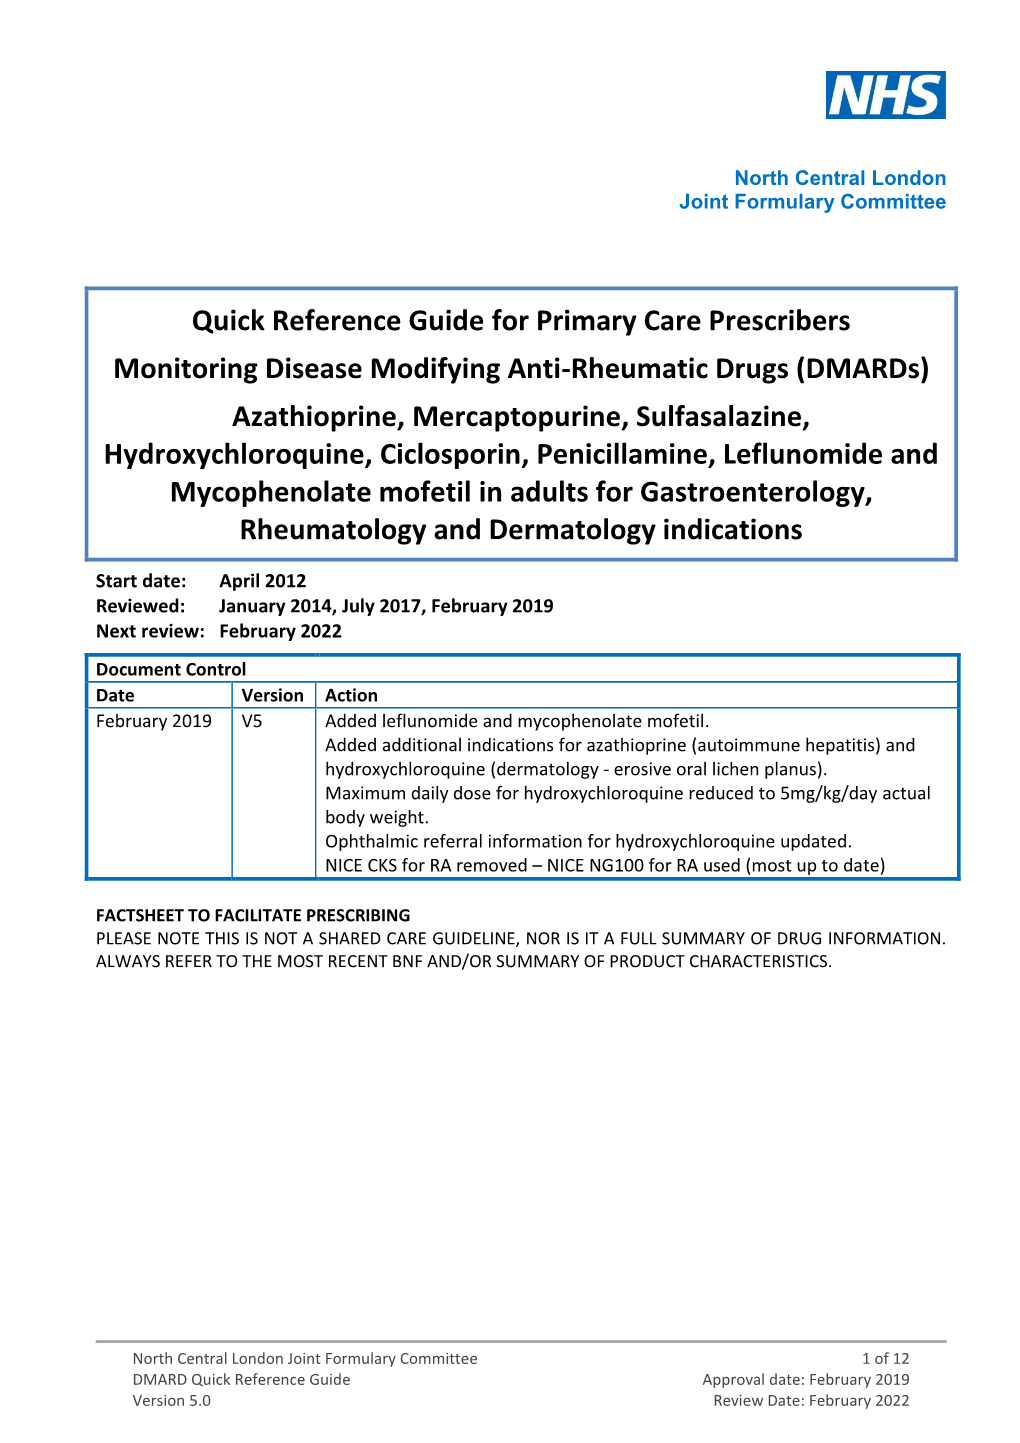 NCL Quick Reference Guide for Primary Care Prescribers Dmards